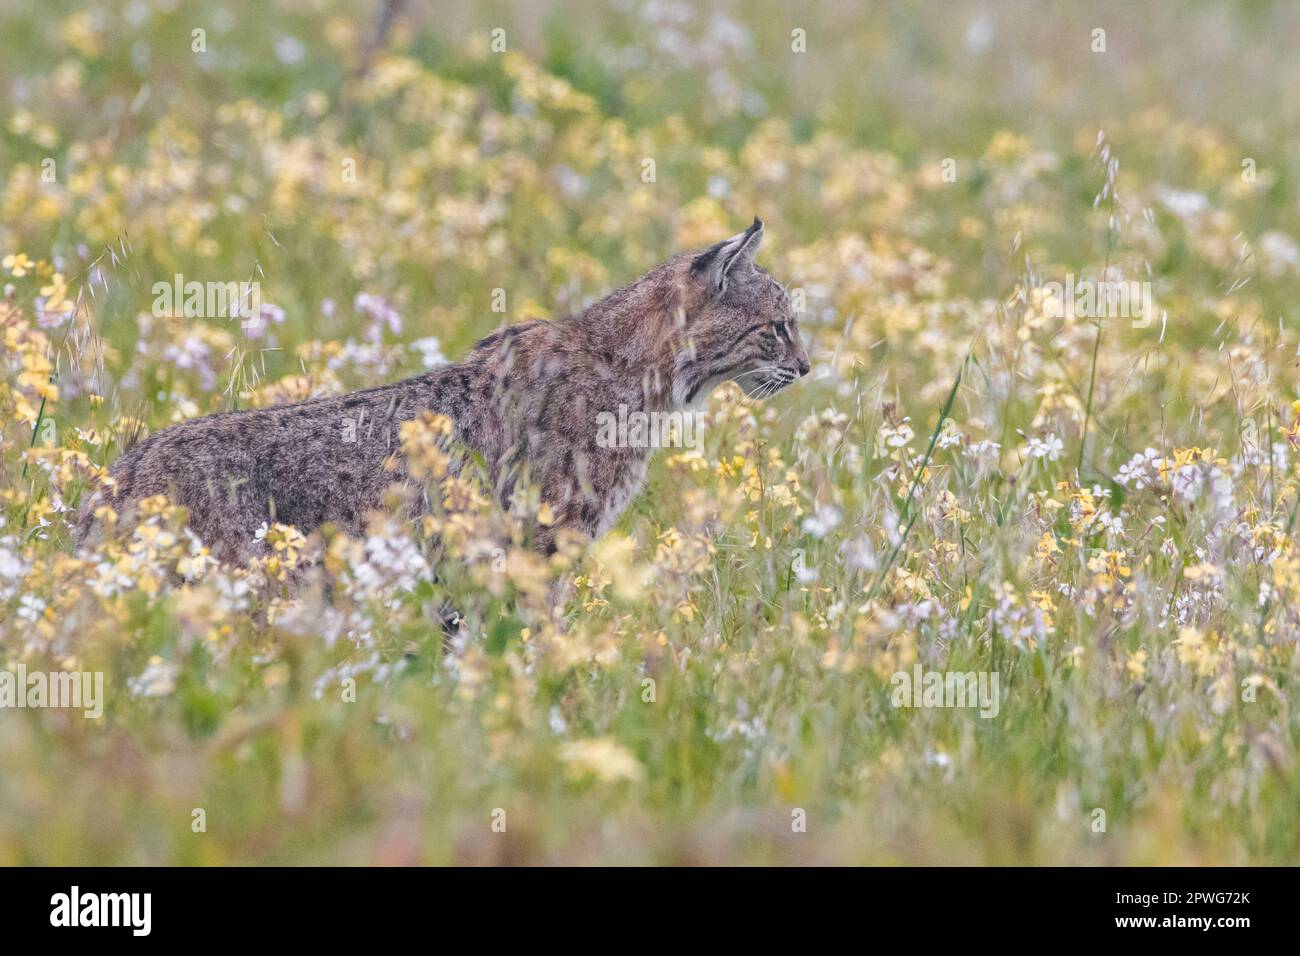 A bobcat, Lynx rufus, stands in a field of blooming flowers, possibly wild radish, Raphanus sativus, an introduced species to California. Stock Photo